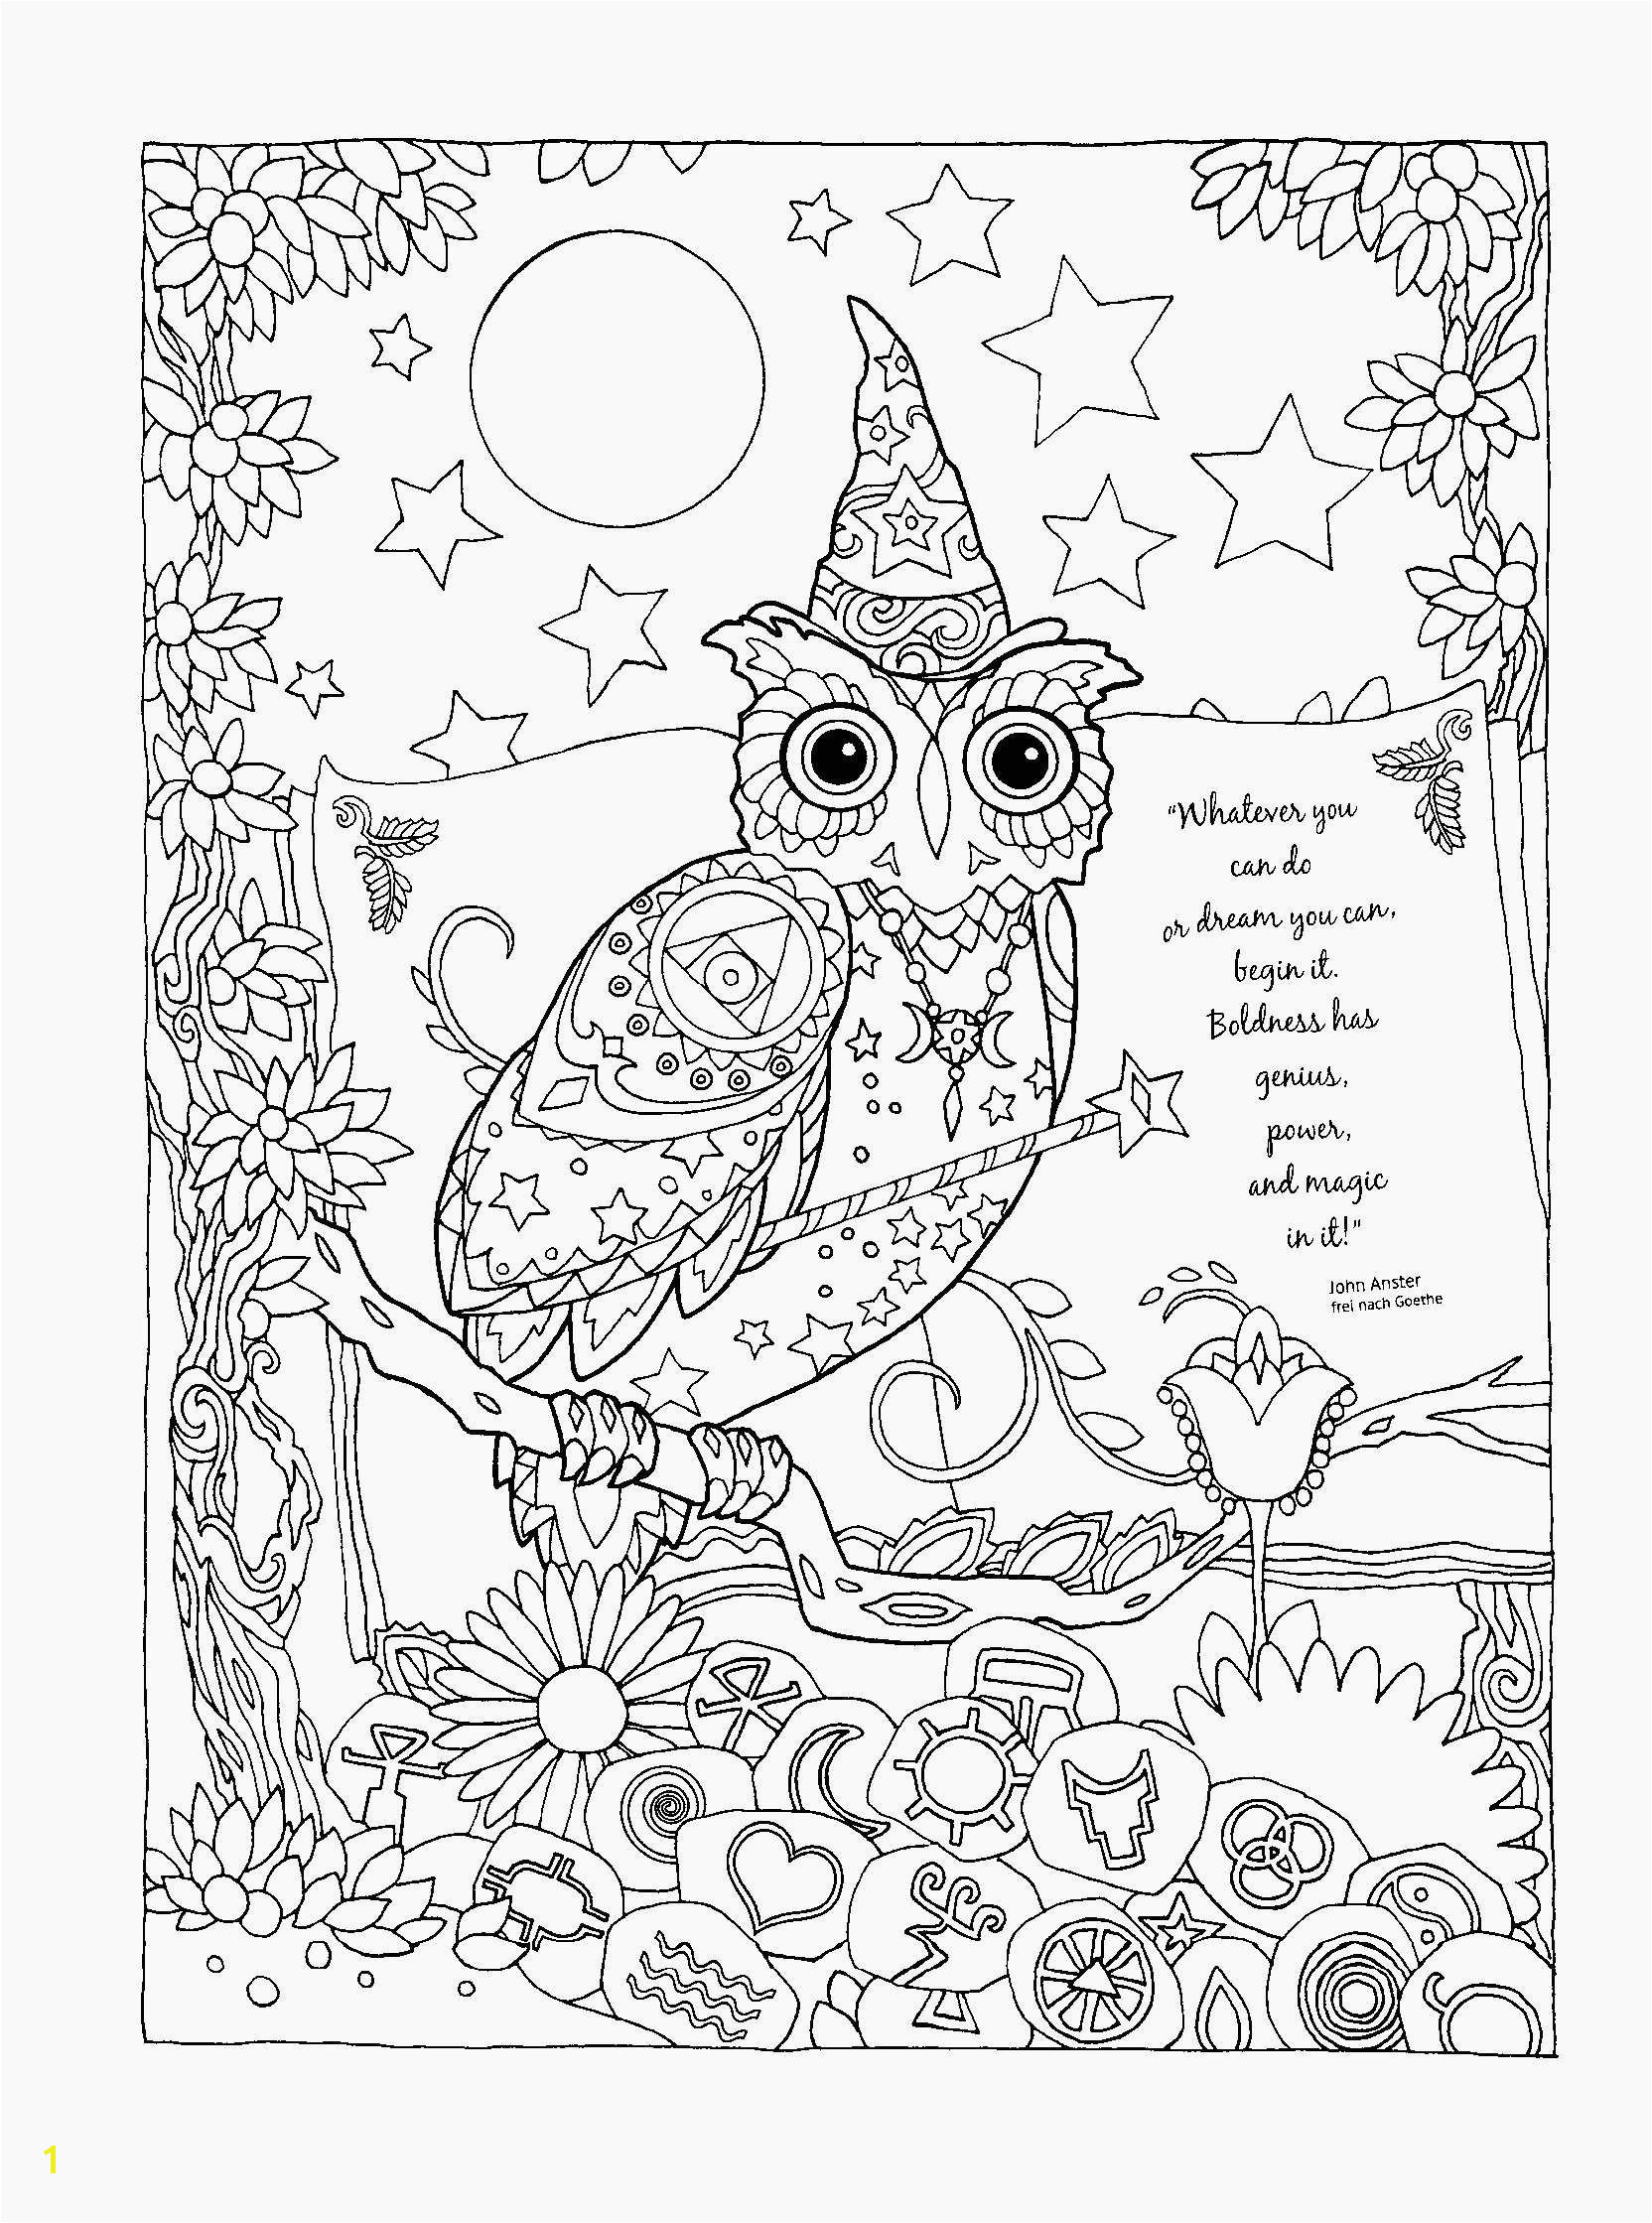 Free Wedding Coloring Pages Fresh Free Wedding Coloring Pages Crosbyandcosg